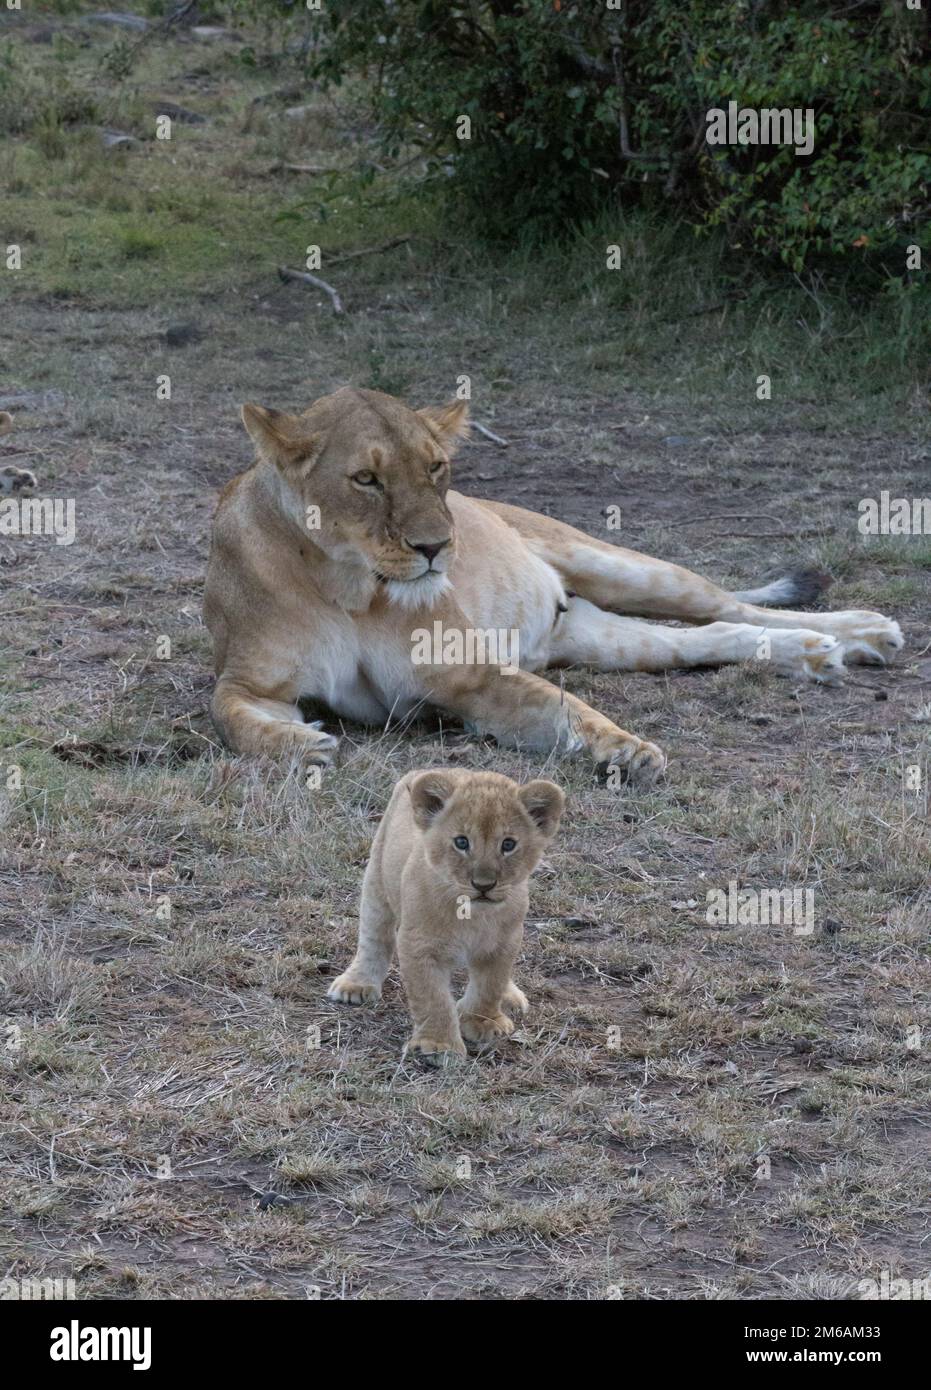 Tired mother lioness rests while her cub plays. Stock Photo